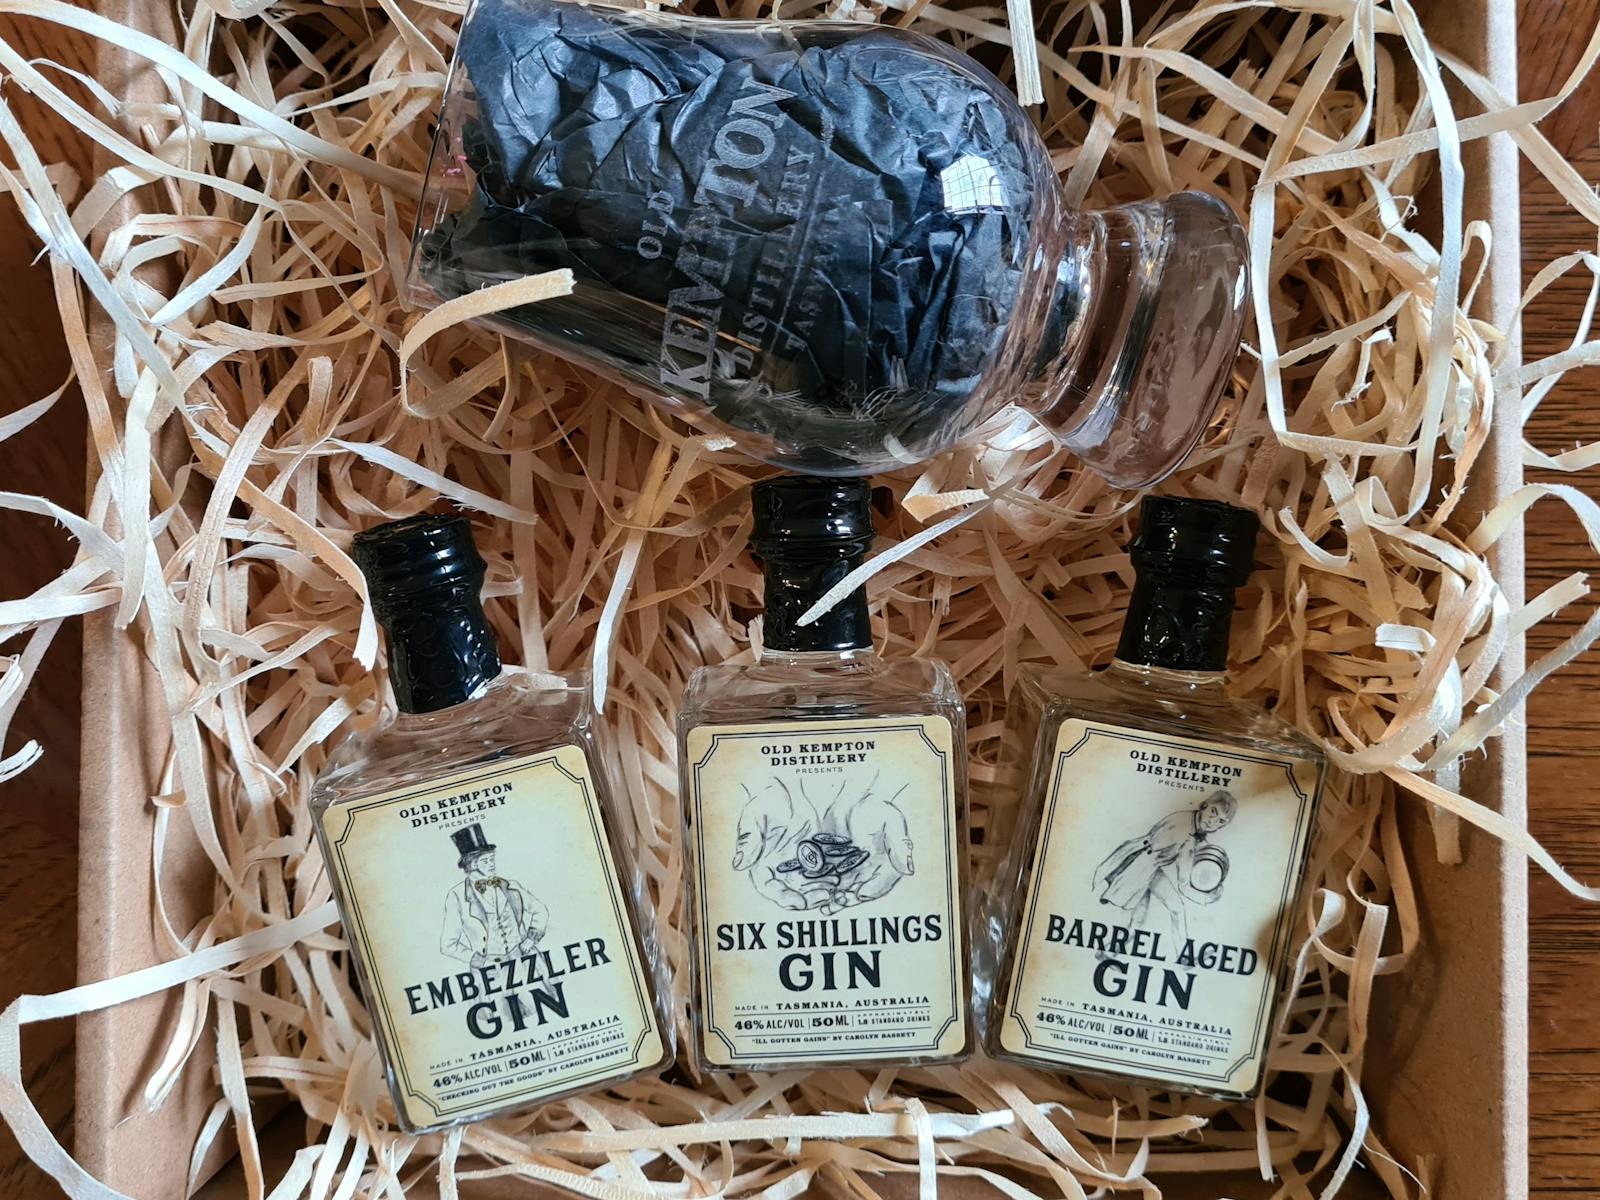 Our gin range in miniature!